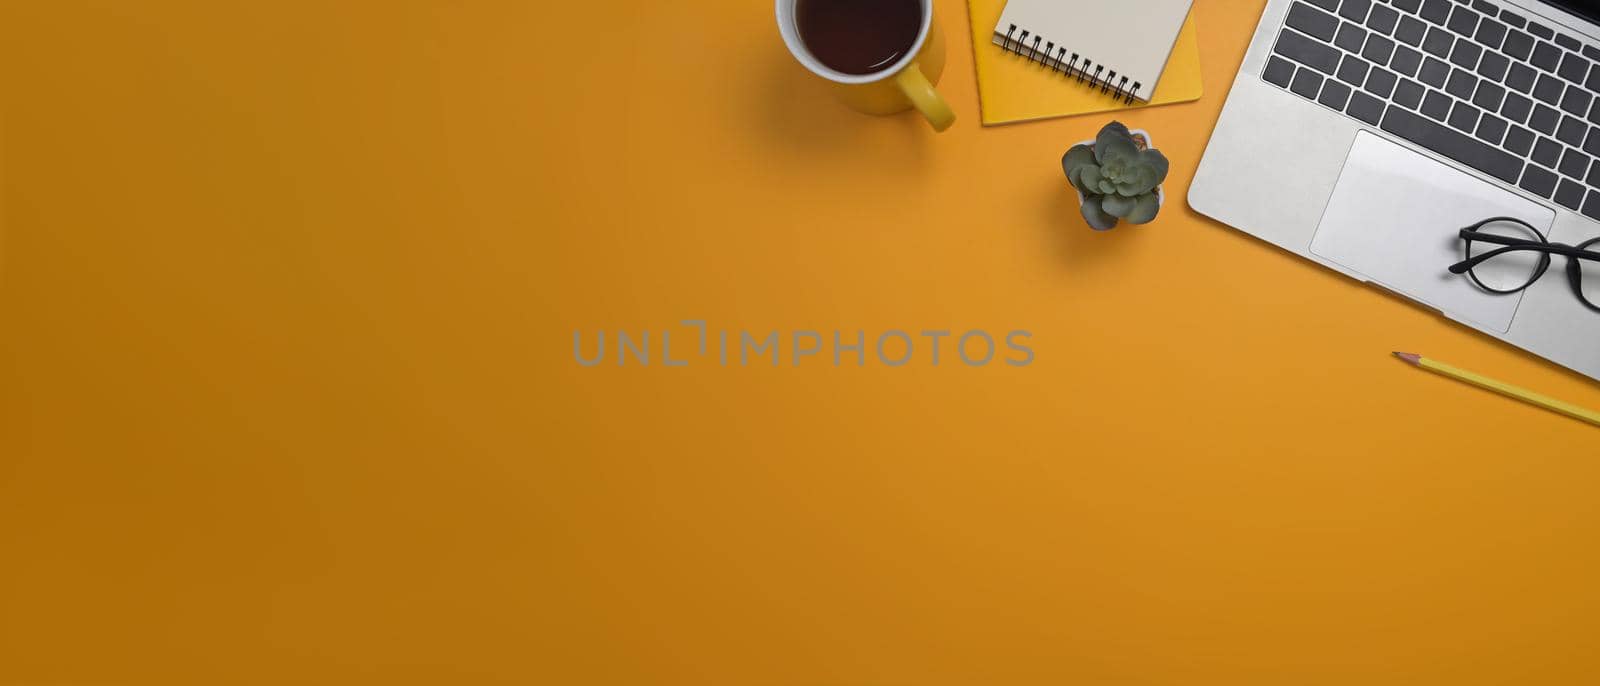 From above view laptop computer, notepads and coffee cup on yellow background with copy space. by prathanchorruangsak